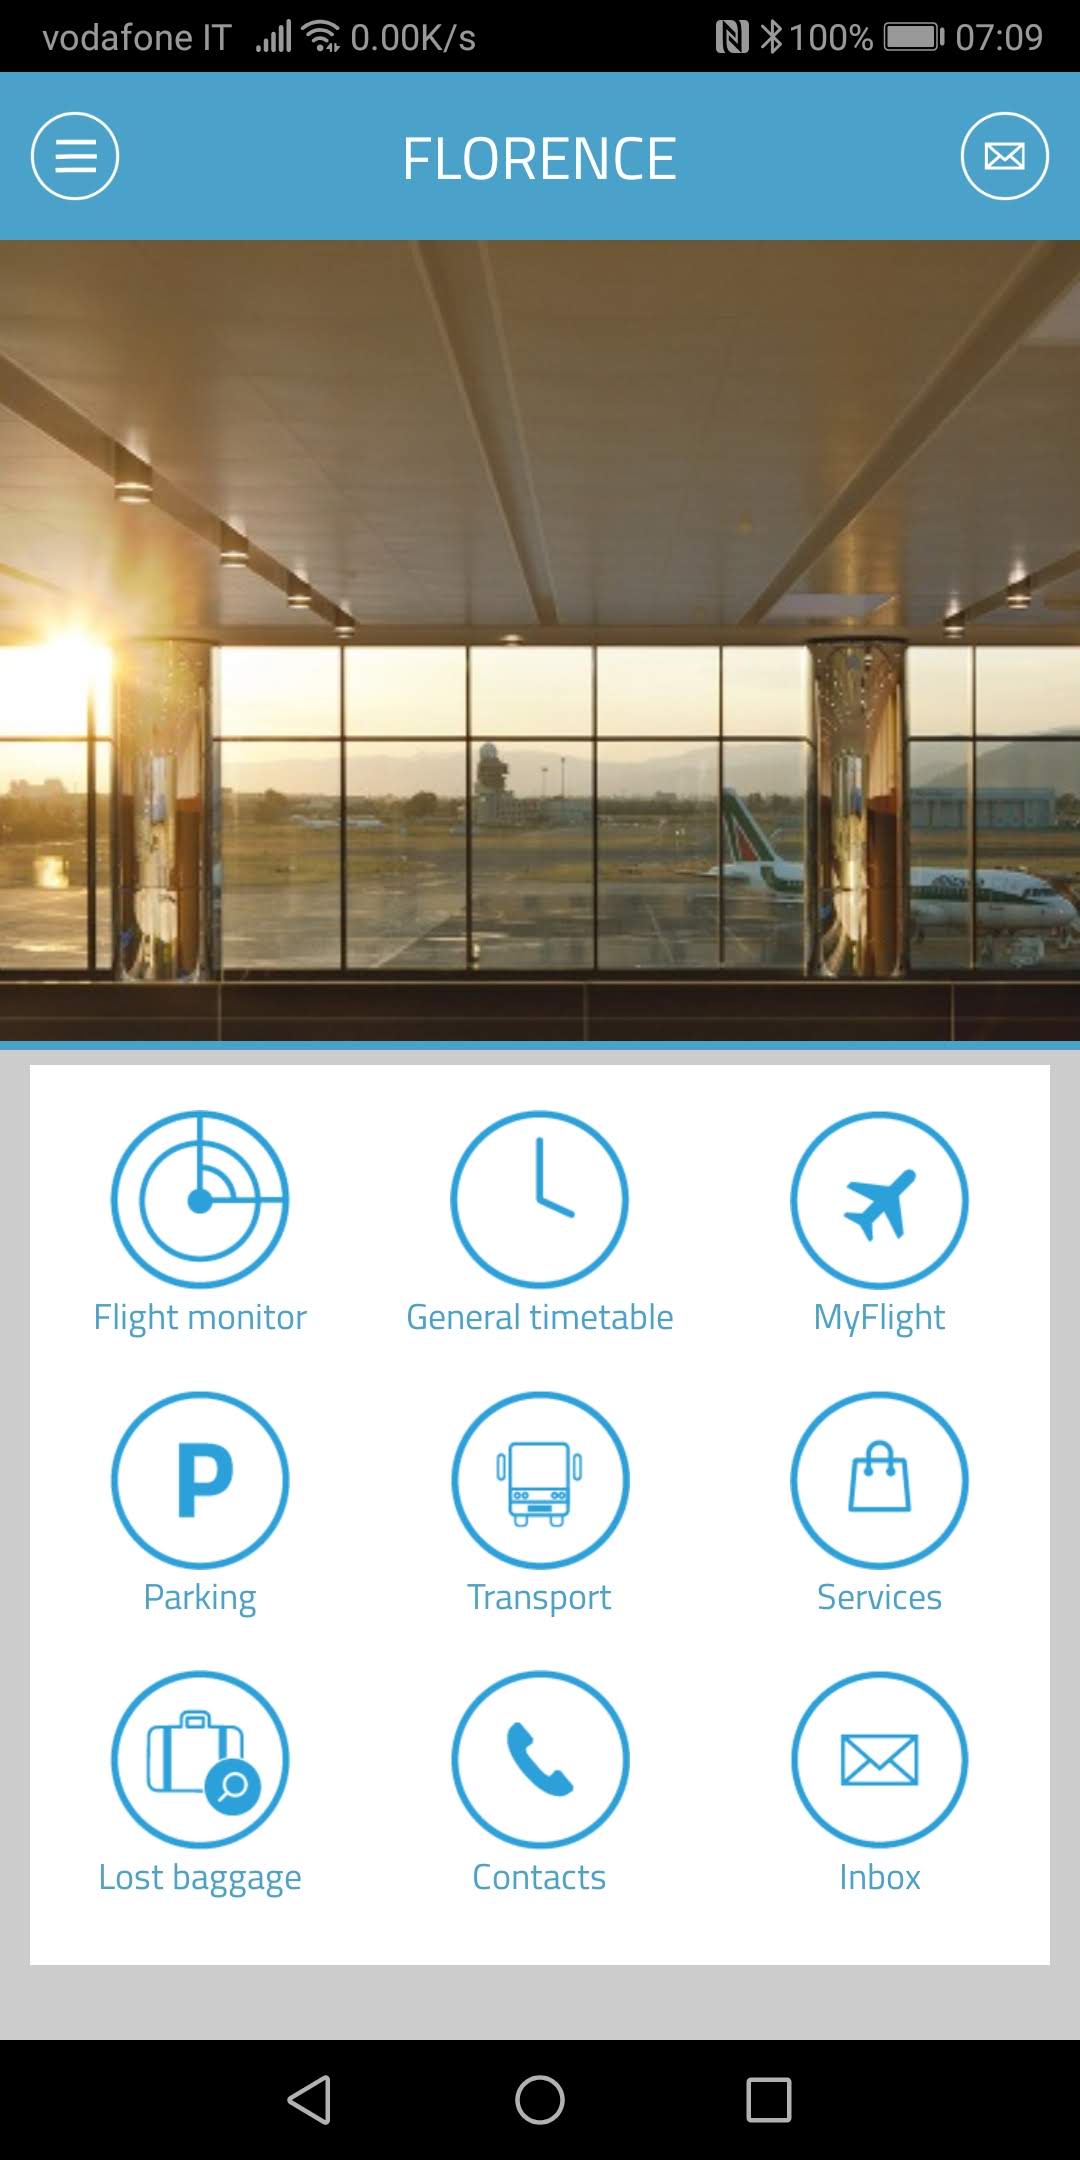 TUSCAN AIRPORT APP. FOR BOTH FLORENCE AND PISA ITALY